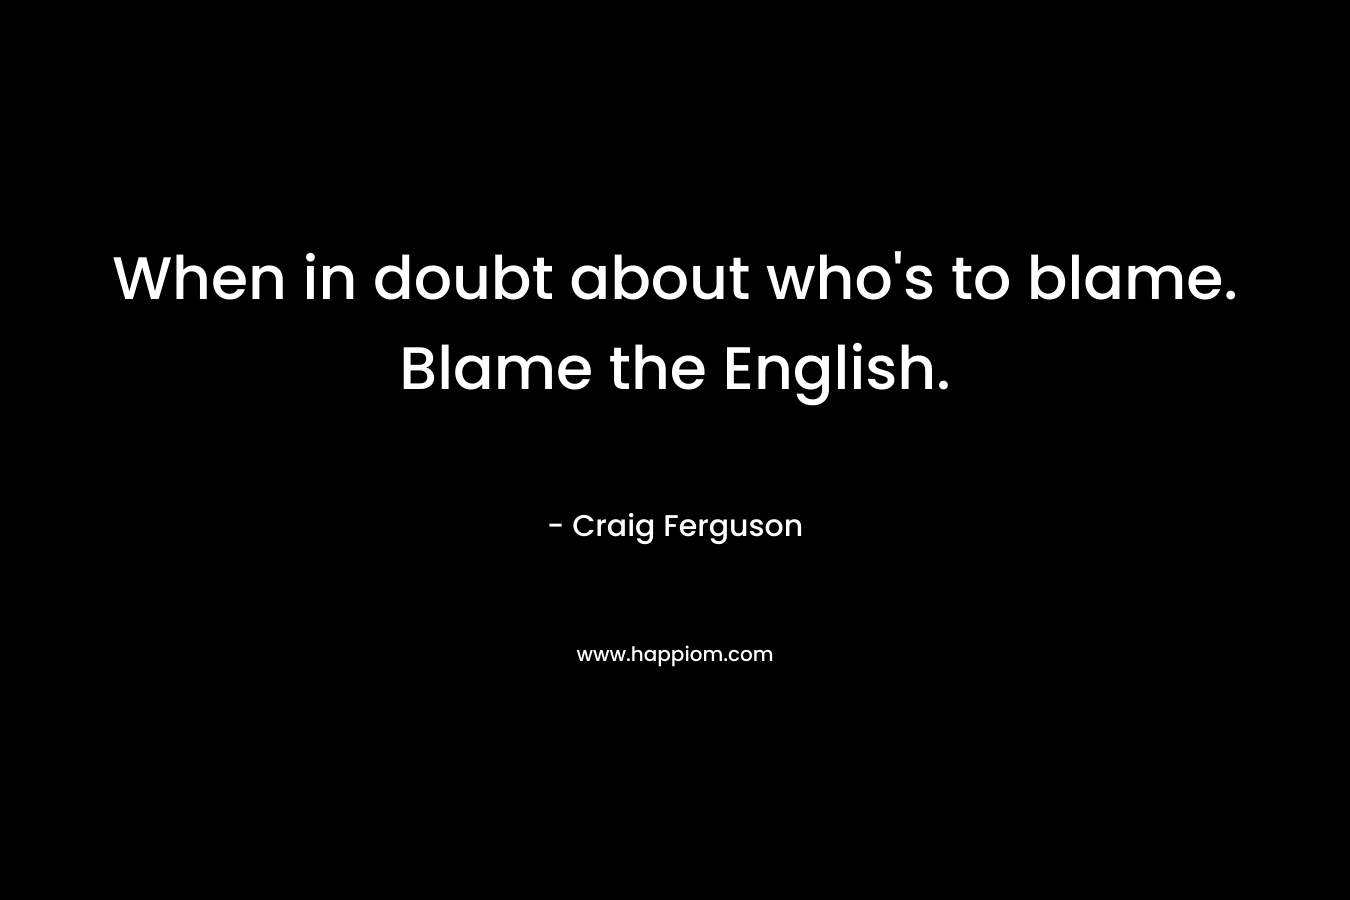 When in doubt about who's to blame. Blame the English.